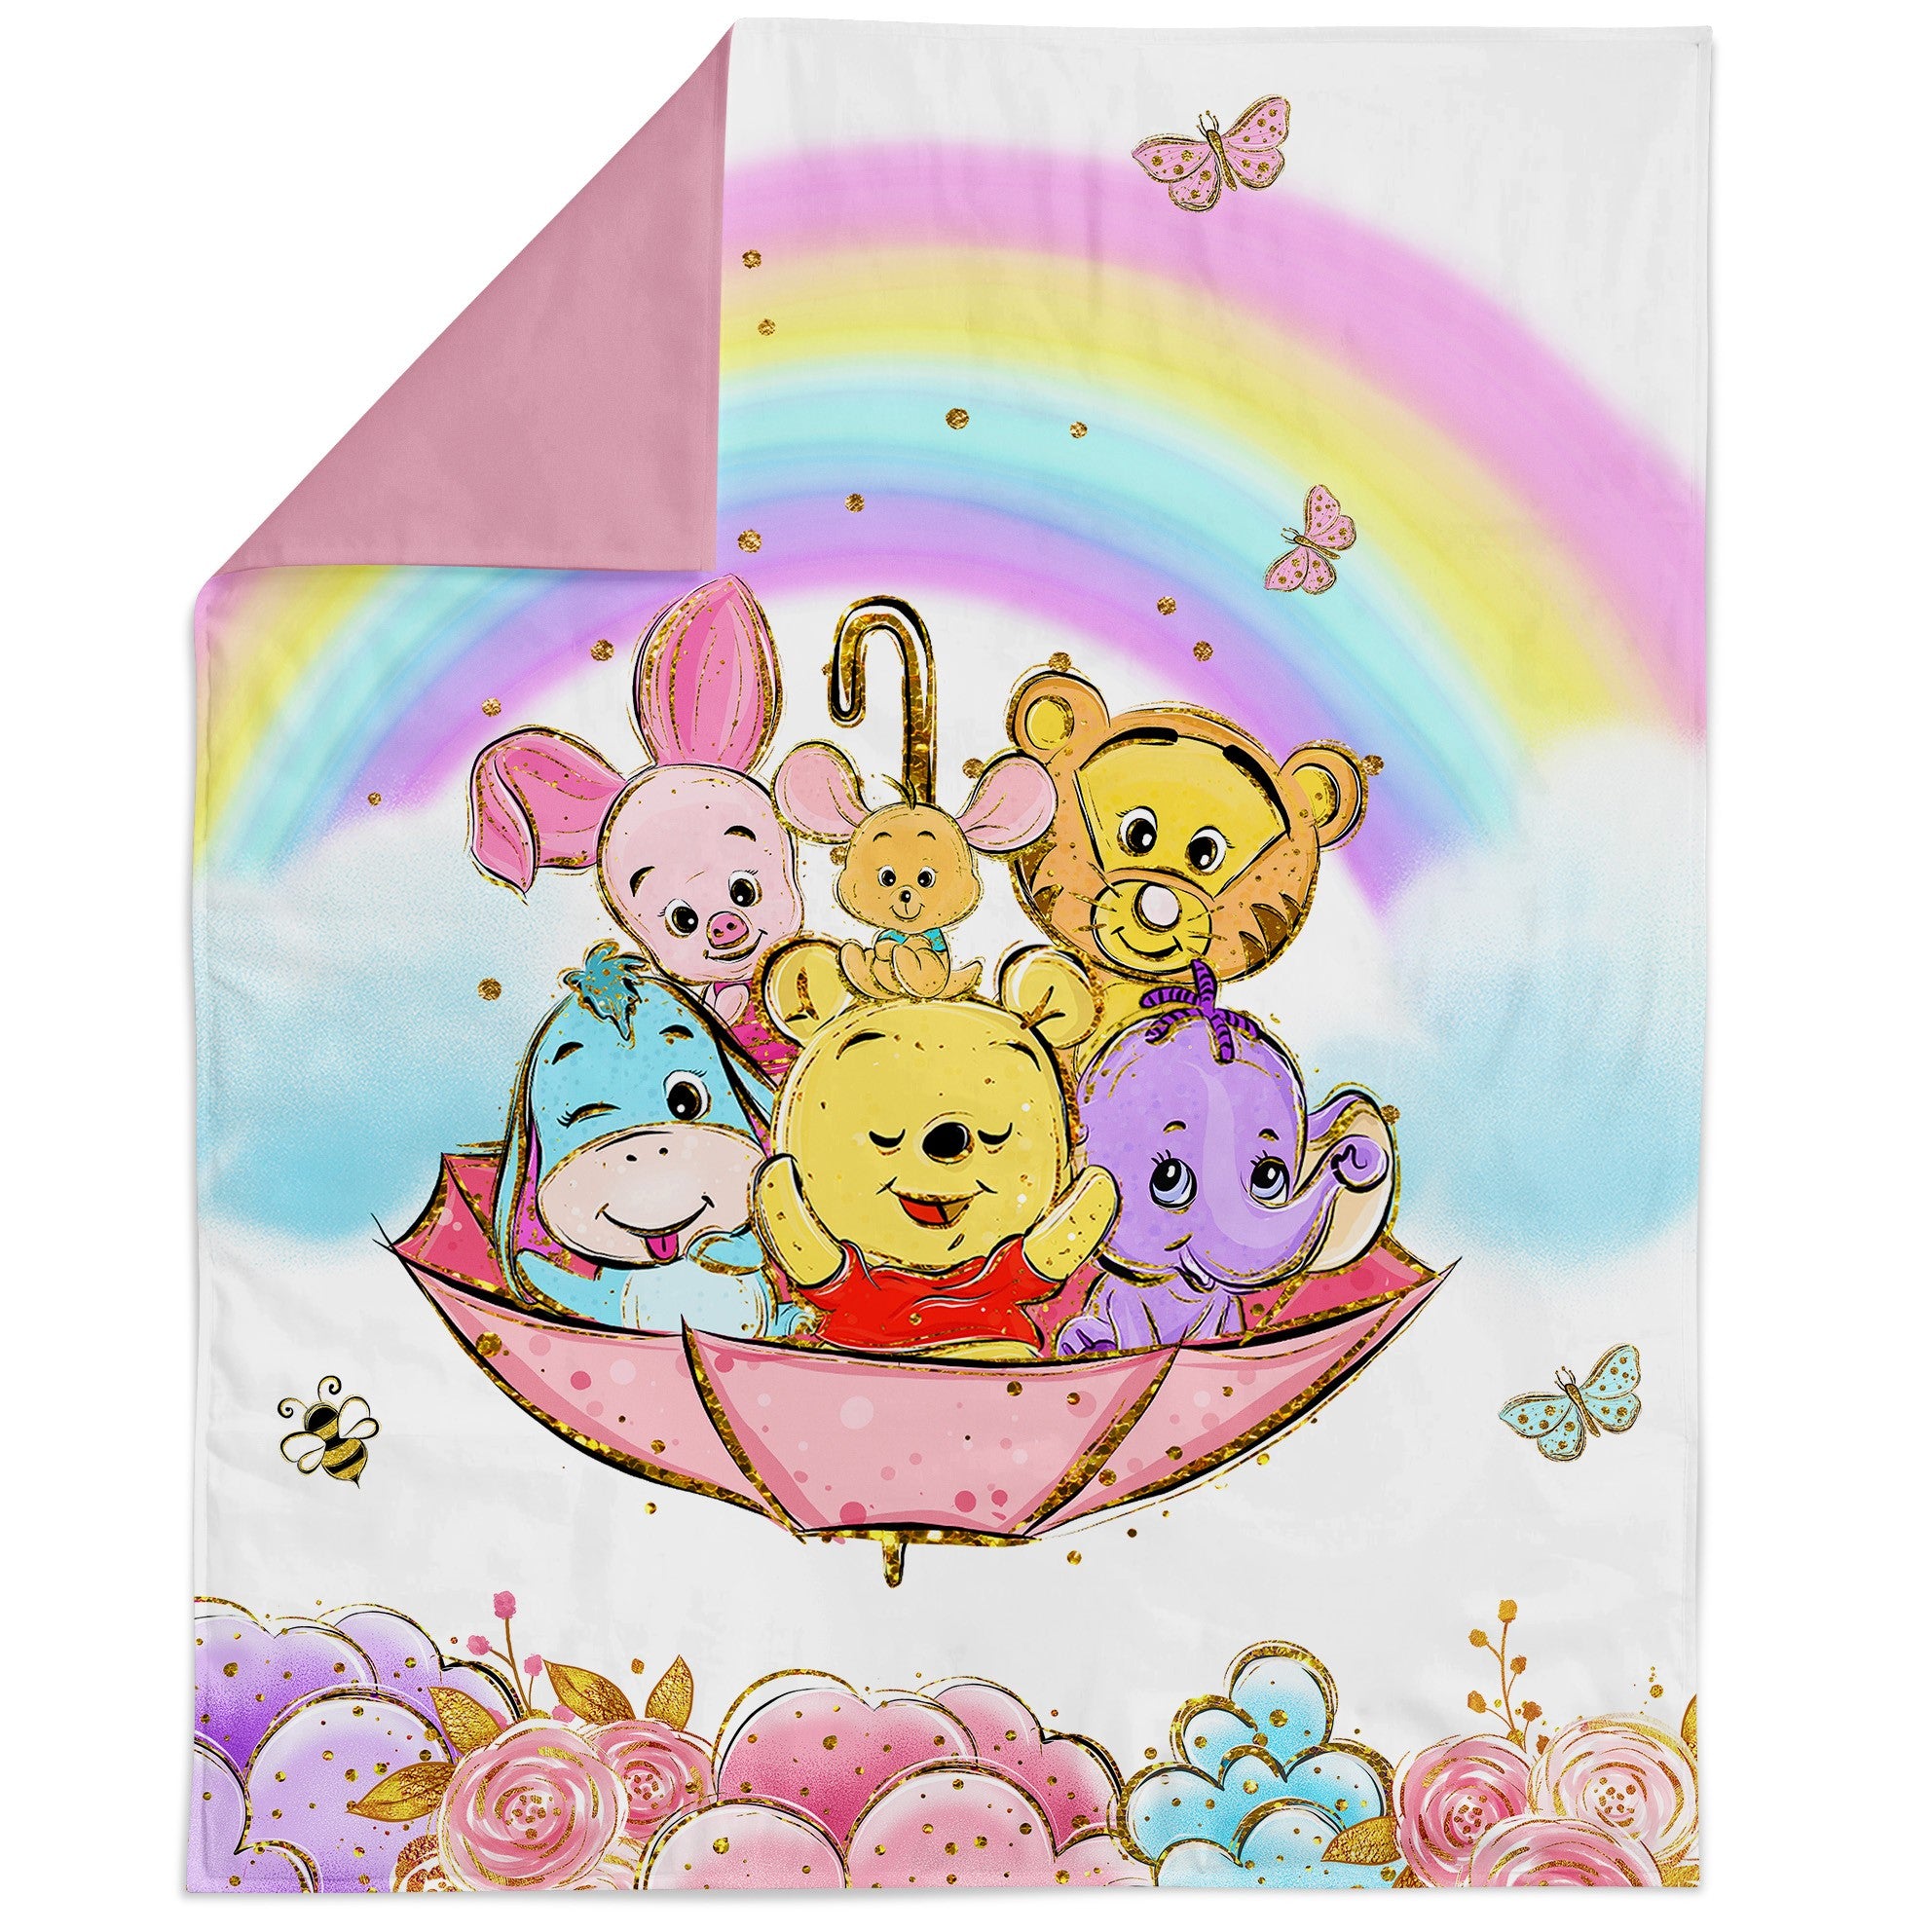 Winnie the Pooh Fabric Panel for Quilting